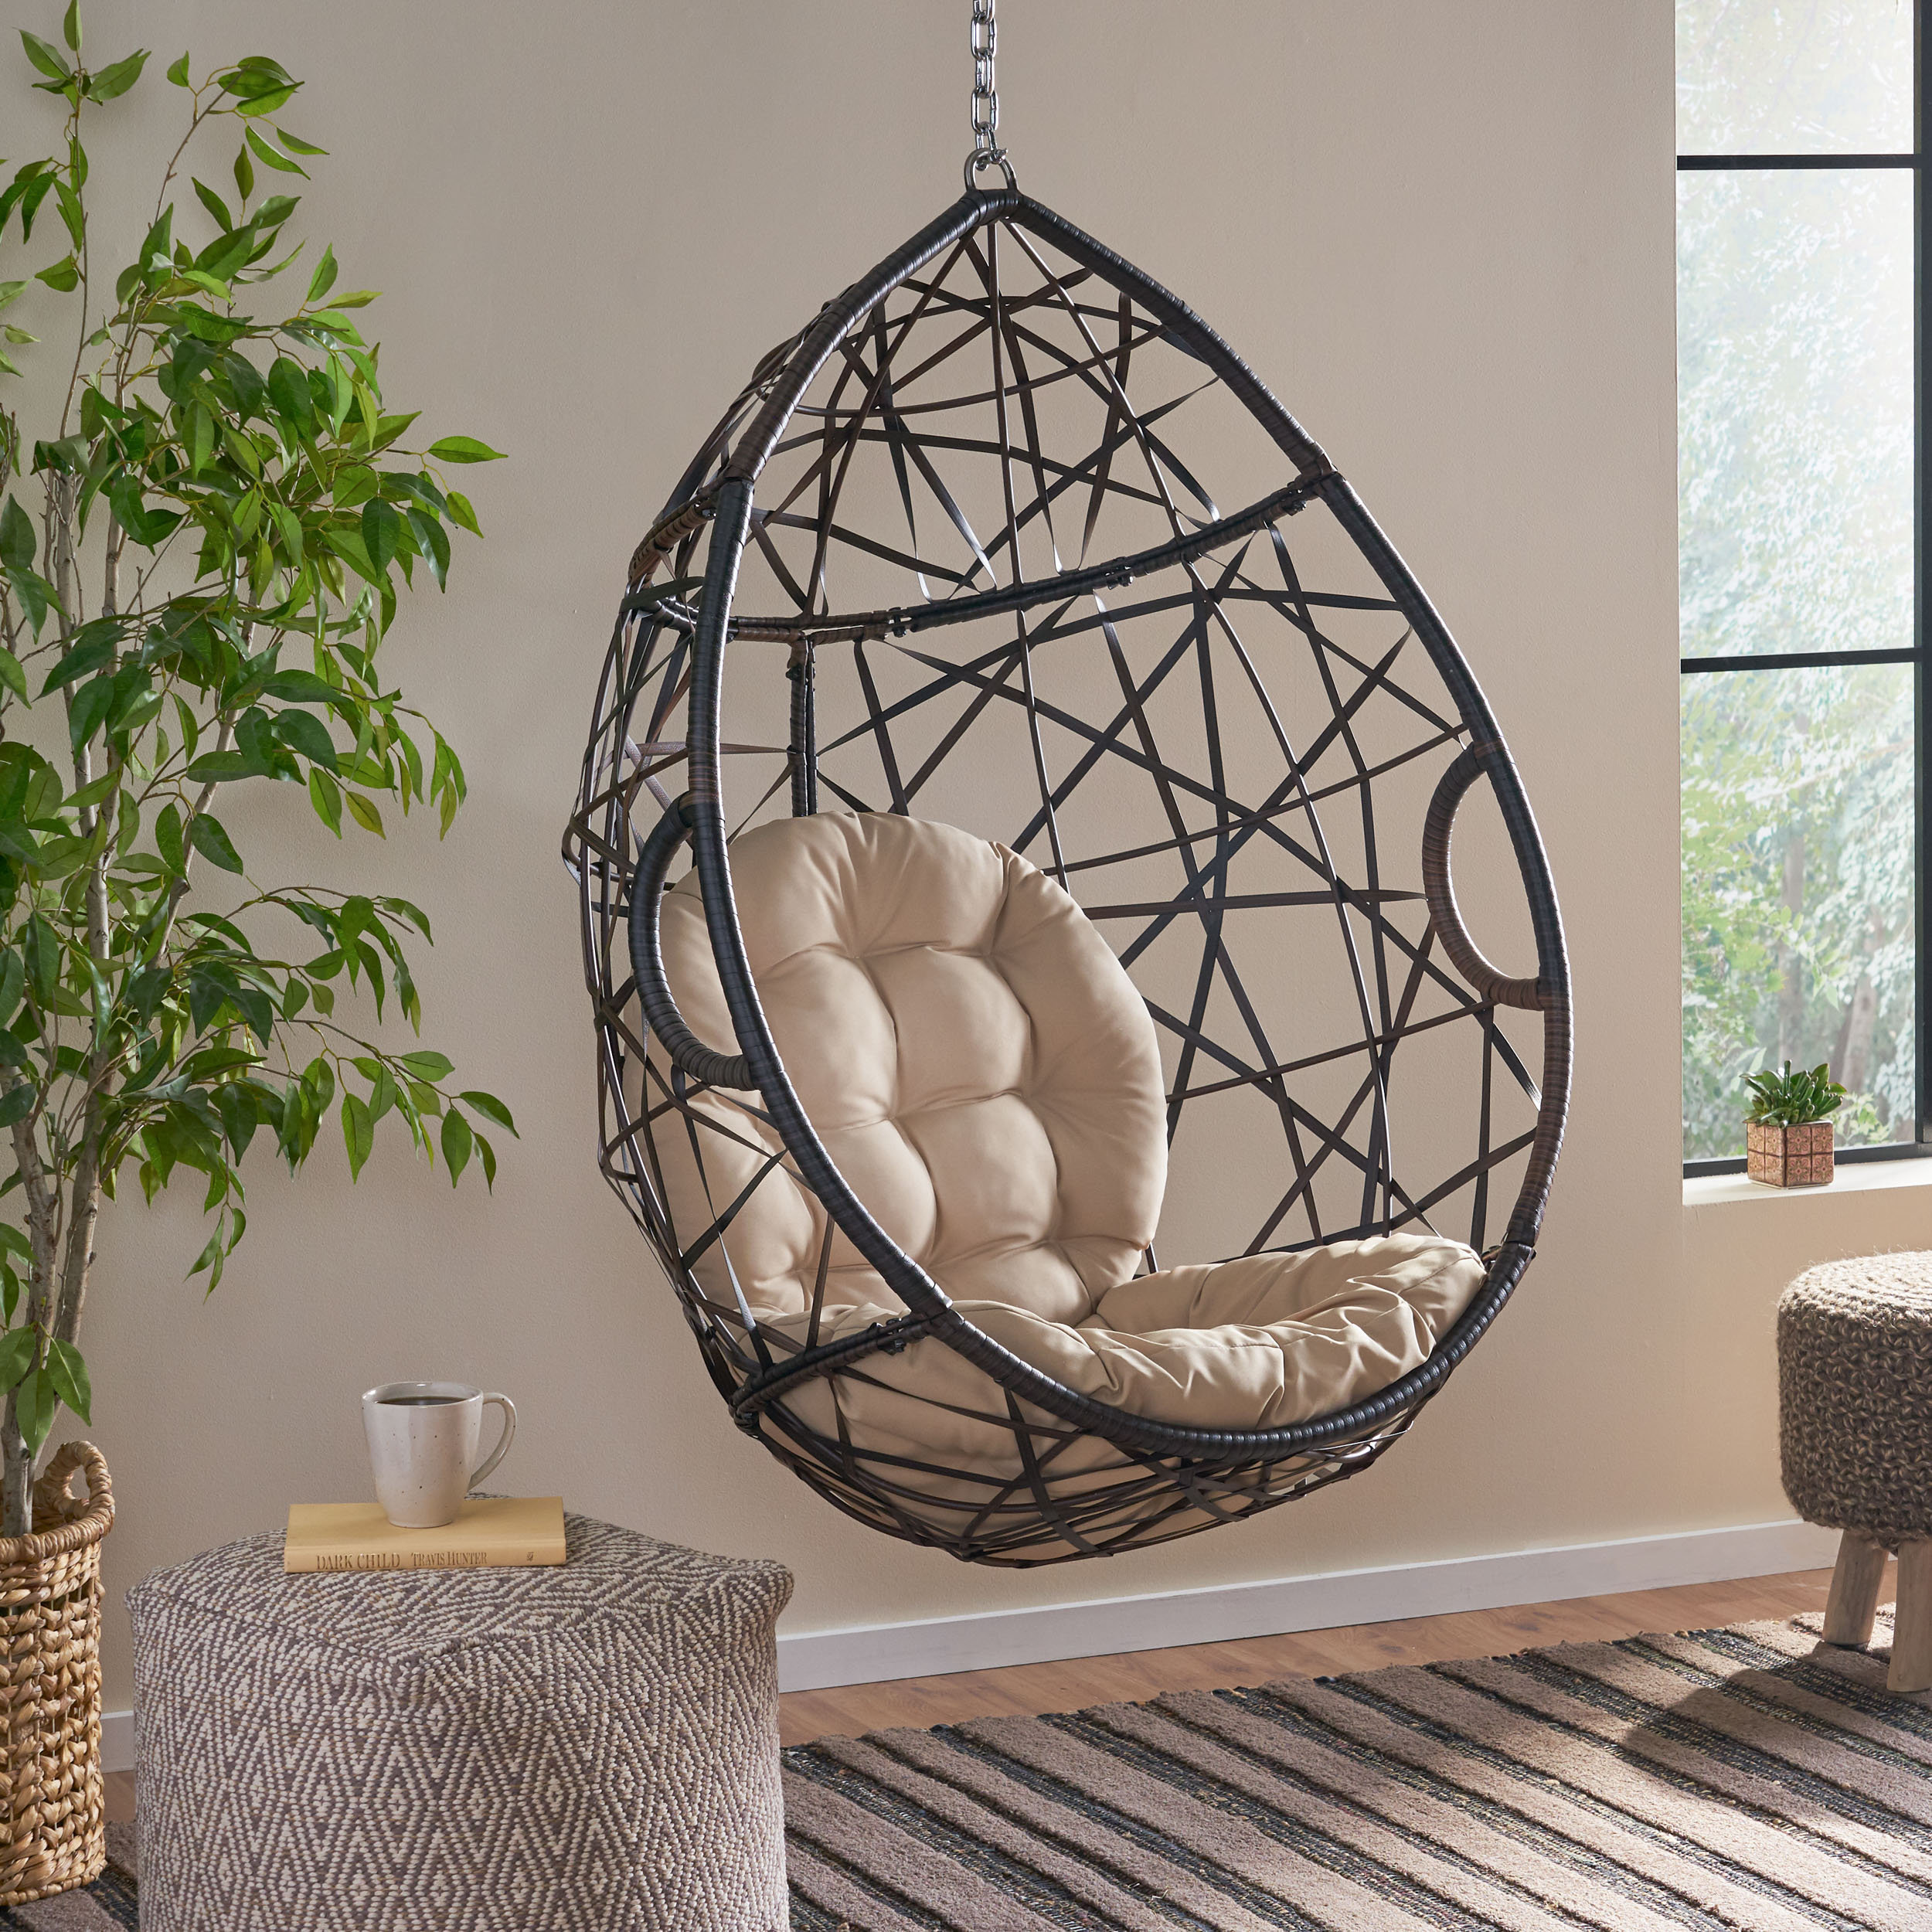 Hanging Chairs Suspended Between Comfort And Function